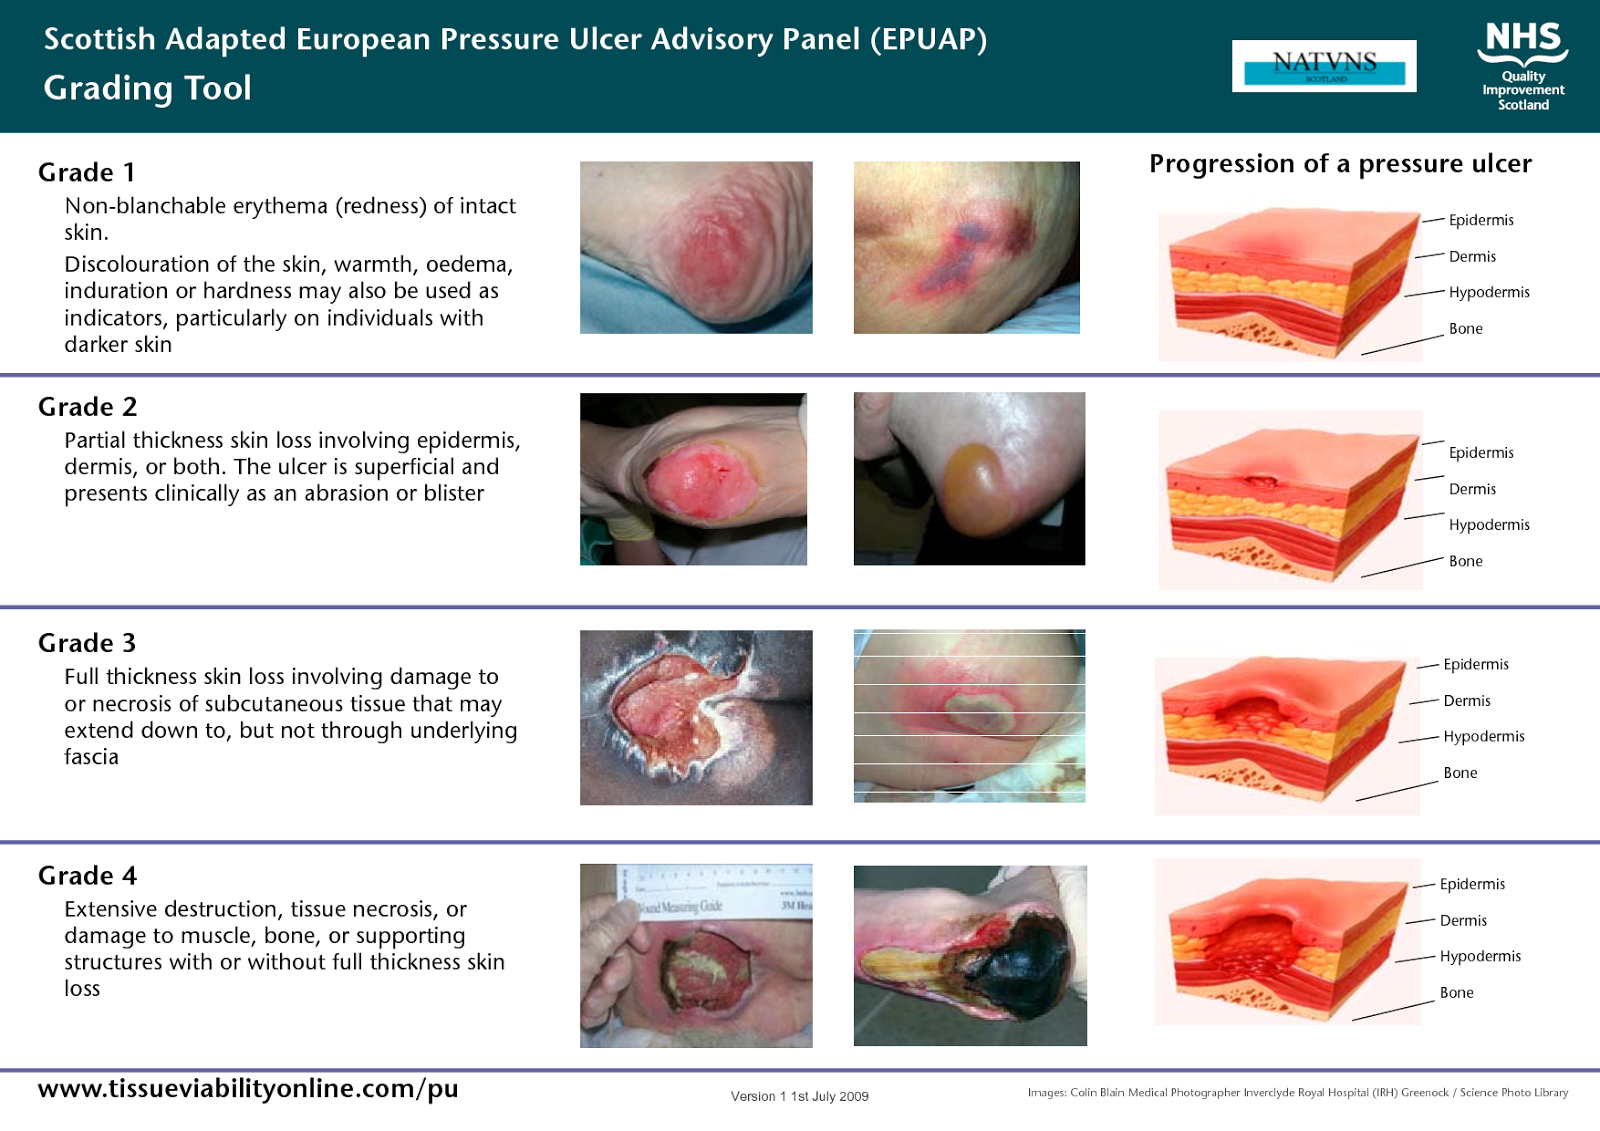 Chasing the Easterly Winds: Pressure Ulcers